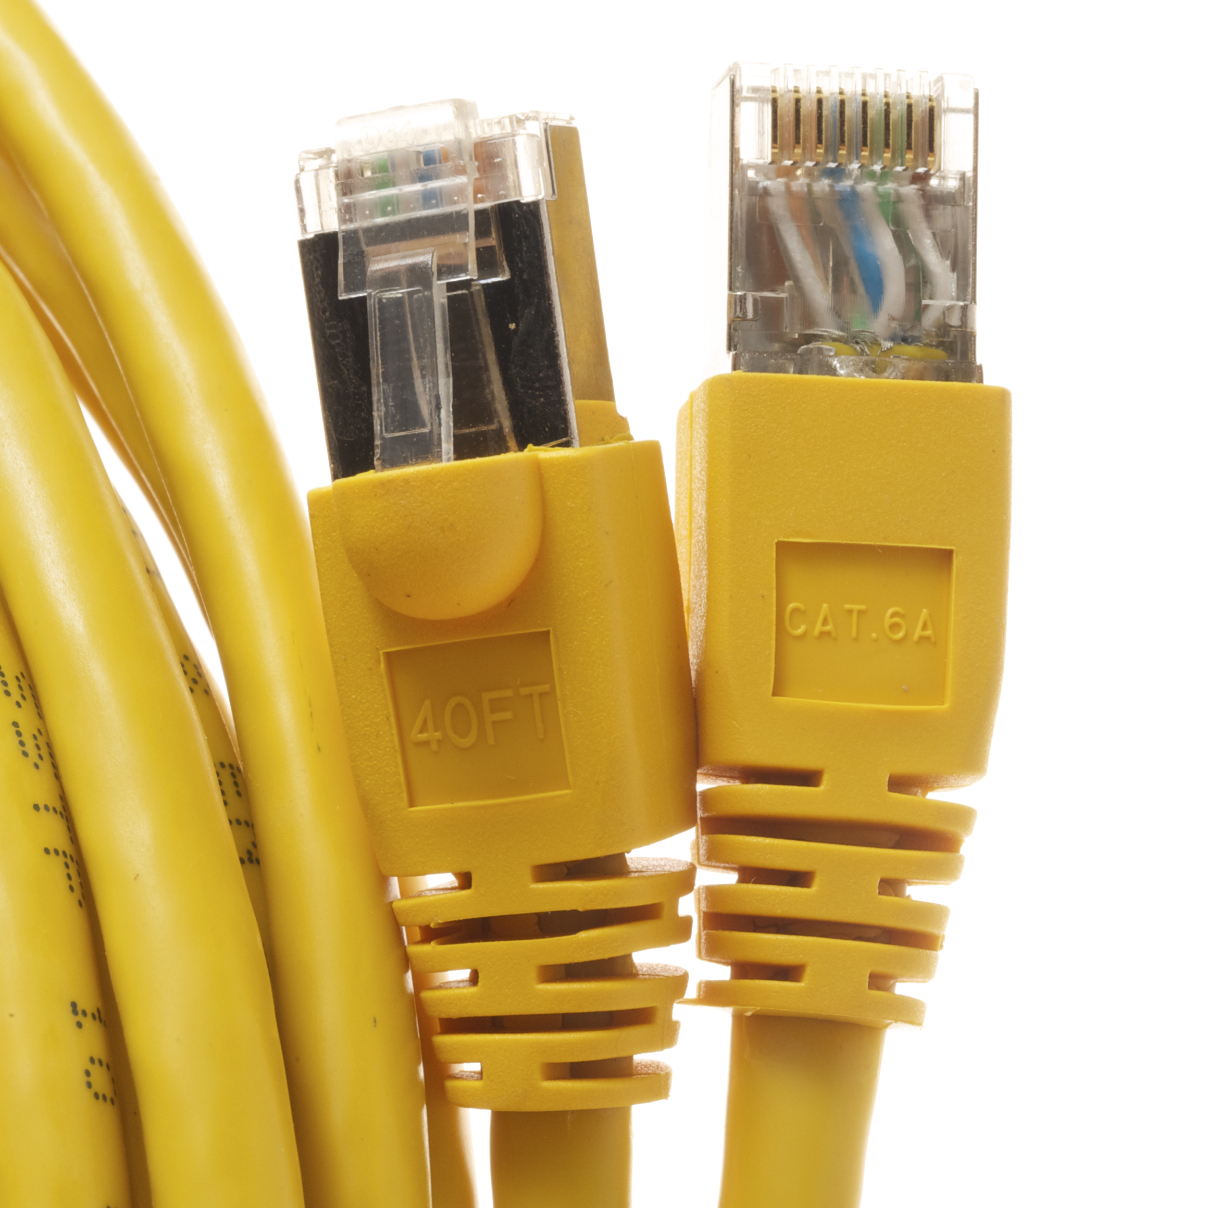 Category 6A Yellow Network Cables